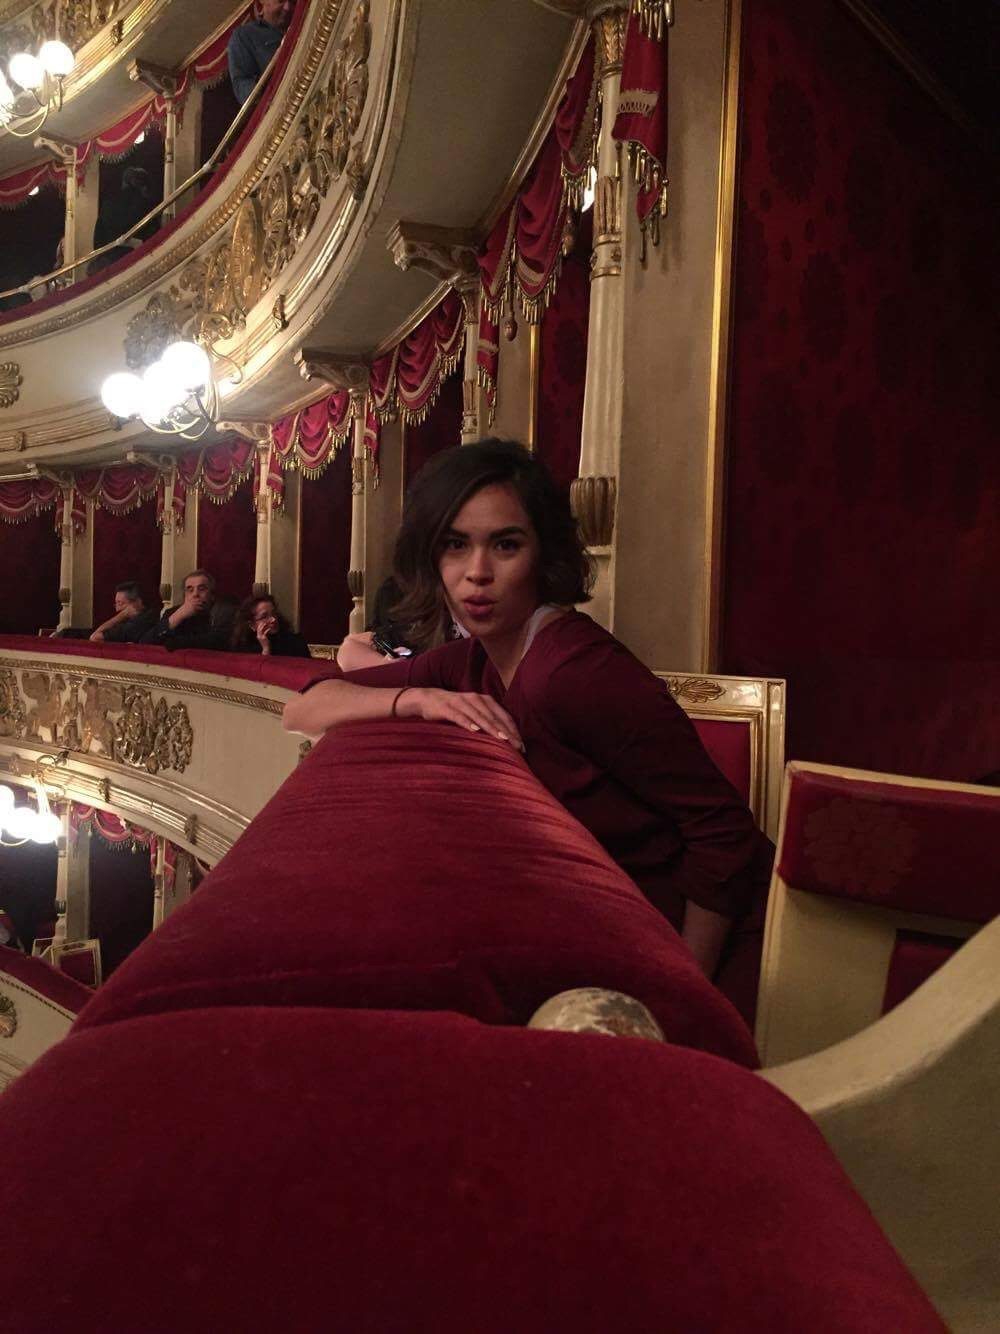 A music education major at Teatro alla Scala in Milan, during her program with IES Milan - Music: Tradition and Innovation